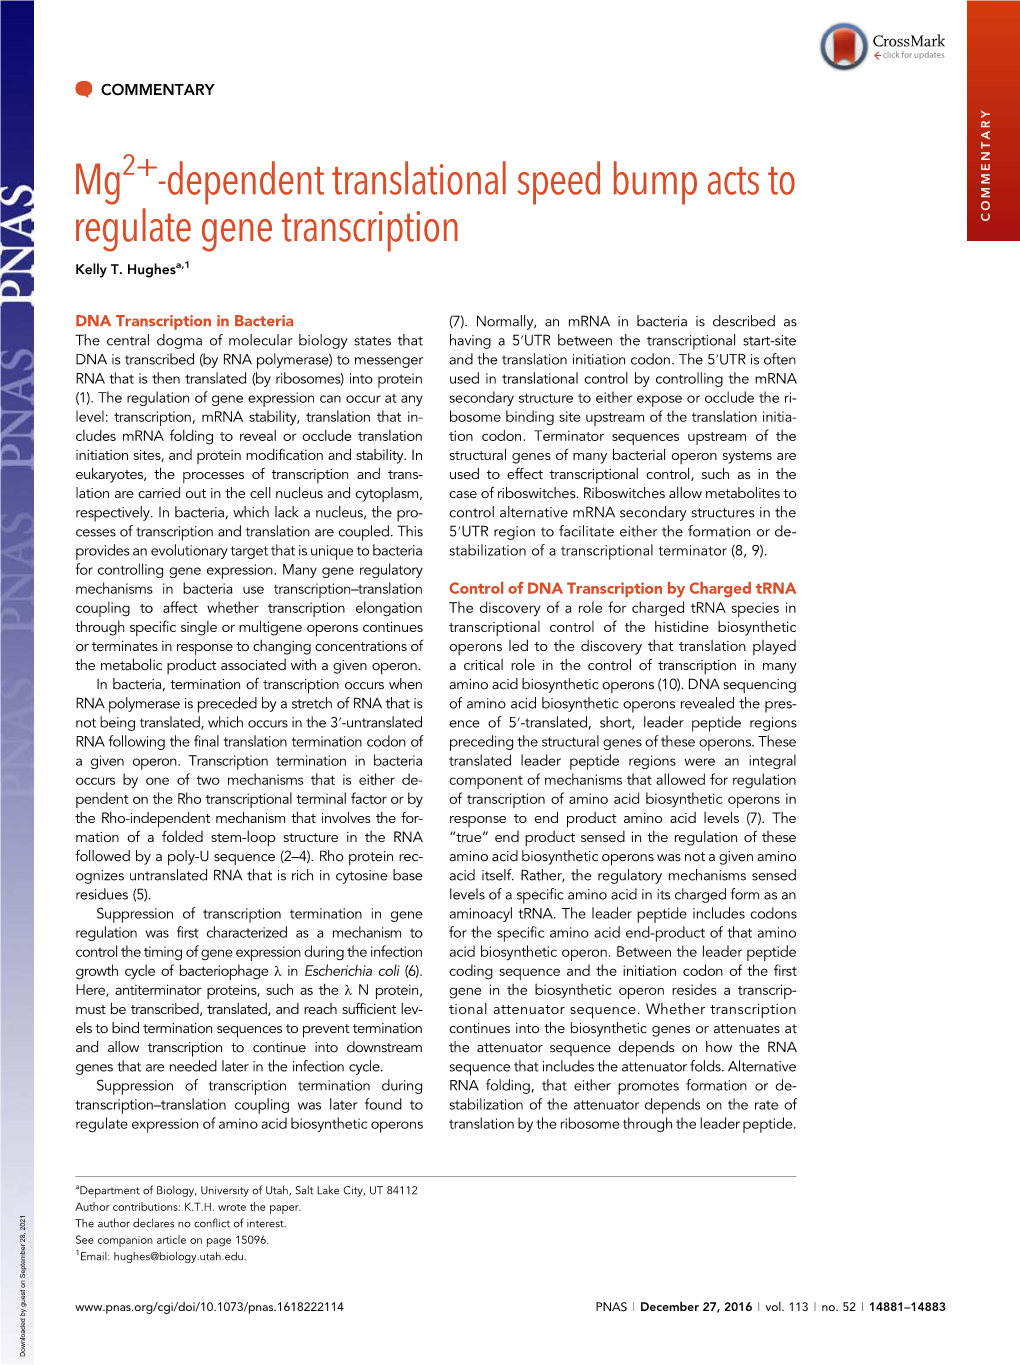 Mg2+-Dependent Translational Speed Bump Acts to Regulate